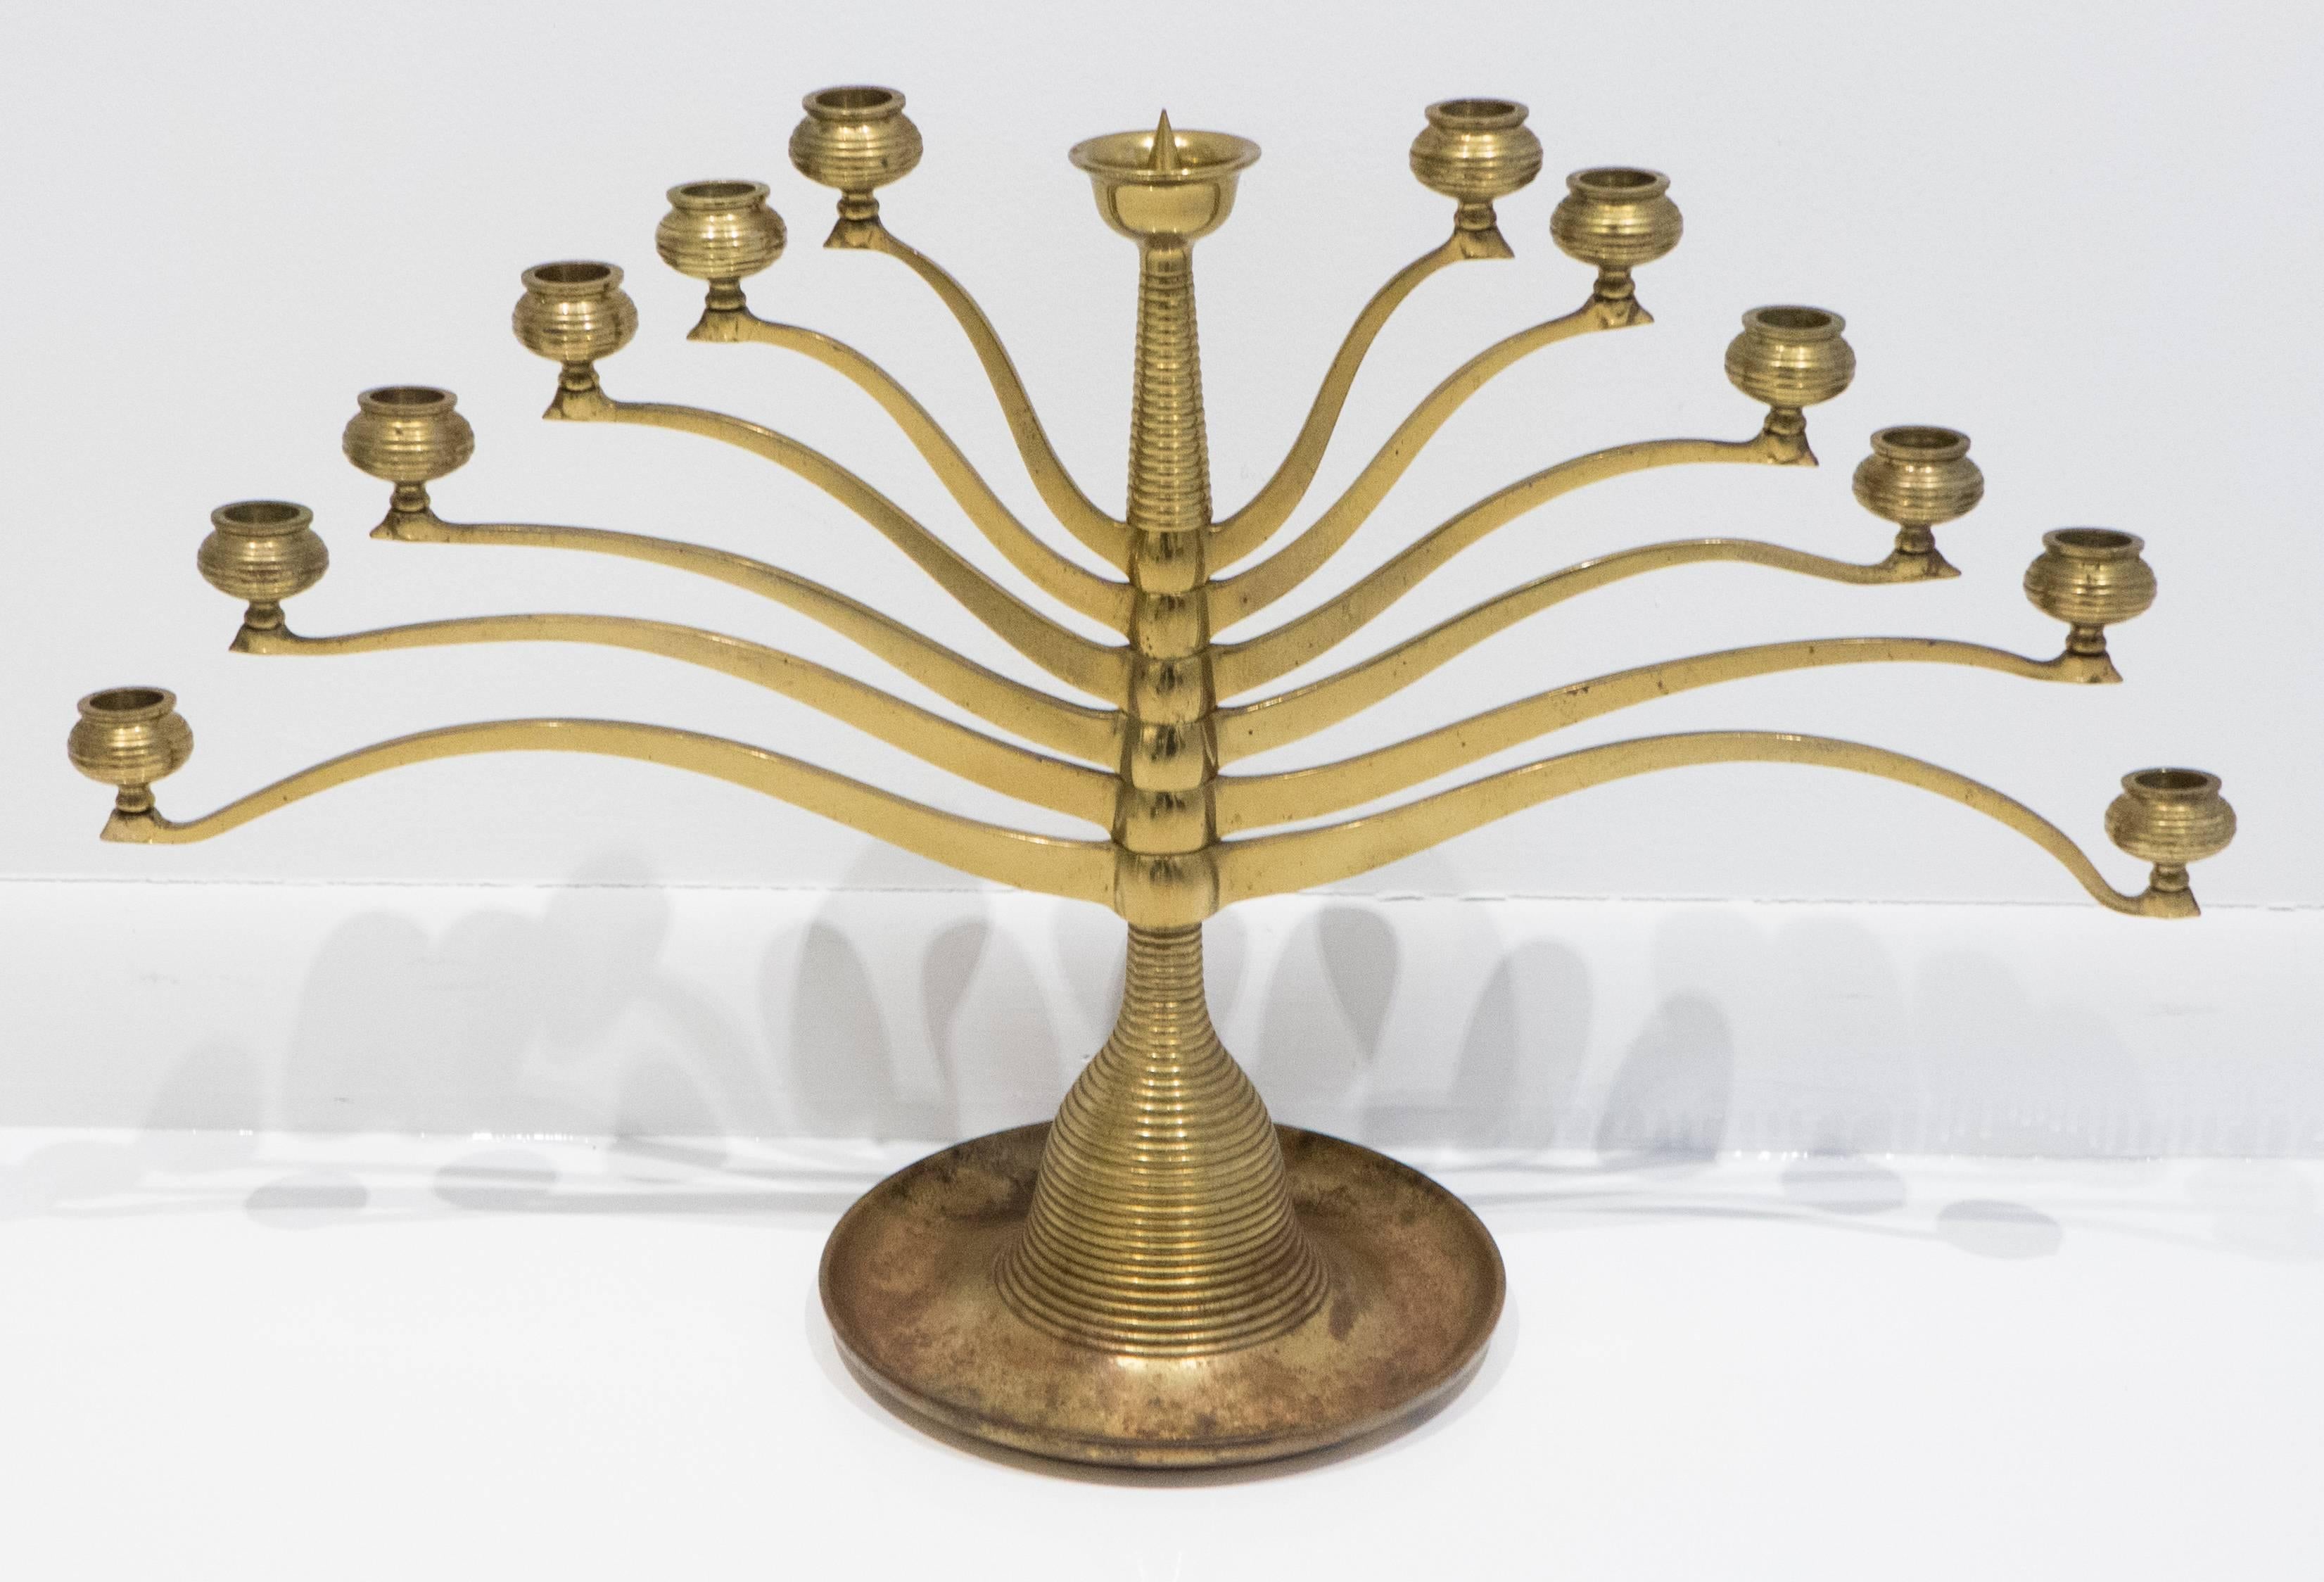 Brass candelabra with six pivoting arms accommodating thirteen candles. Made by the Anderson Foundry in Chicago, circa 1910. Modeled on an iconic Jugenstil design by early modernist master Bruno Paul. Impressed mark underneath.